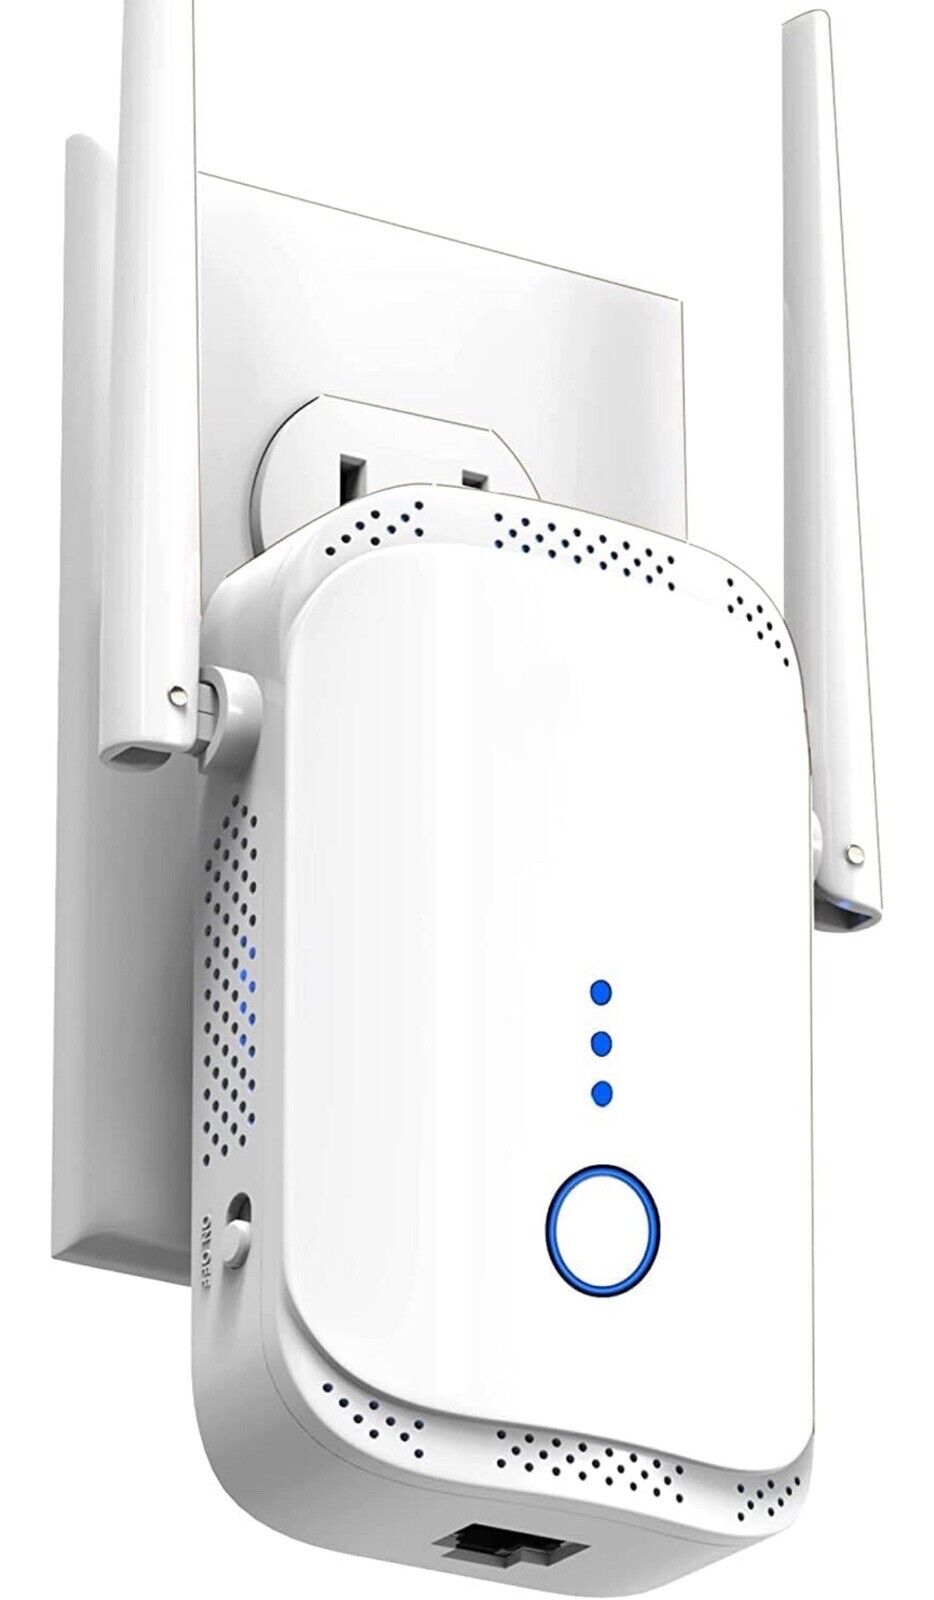 Fastest WiFi Extender/Booster | Latest Release Up to 74% Faster